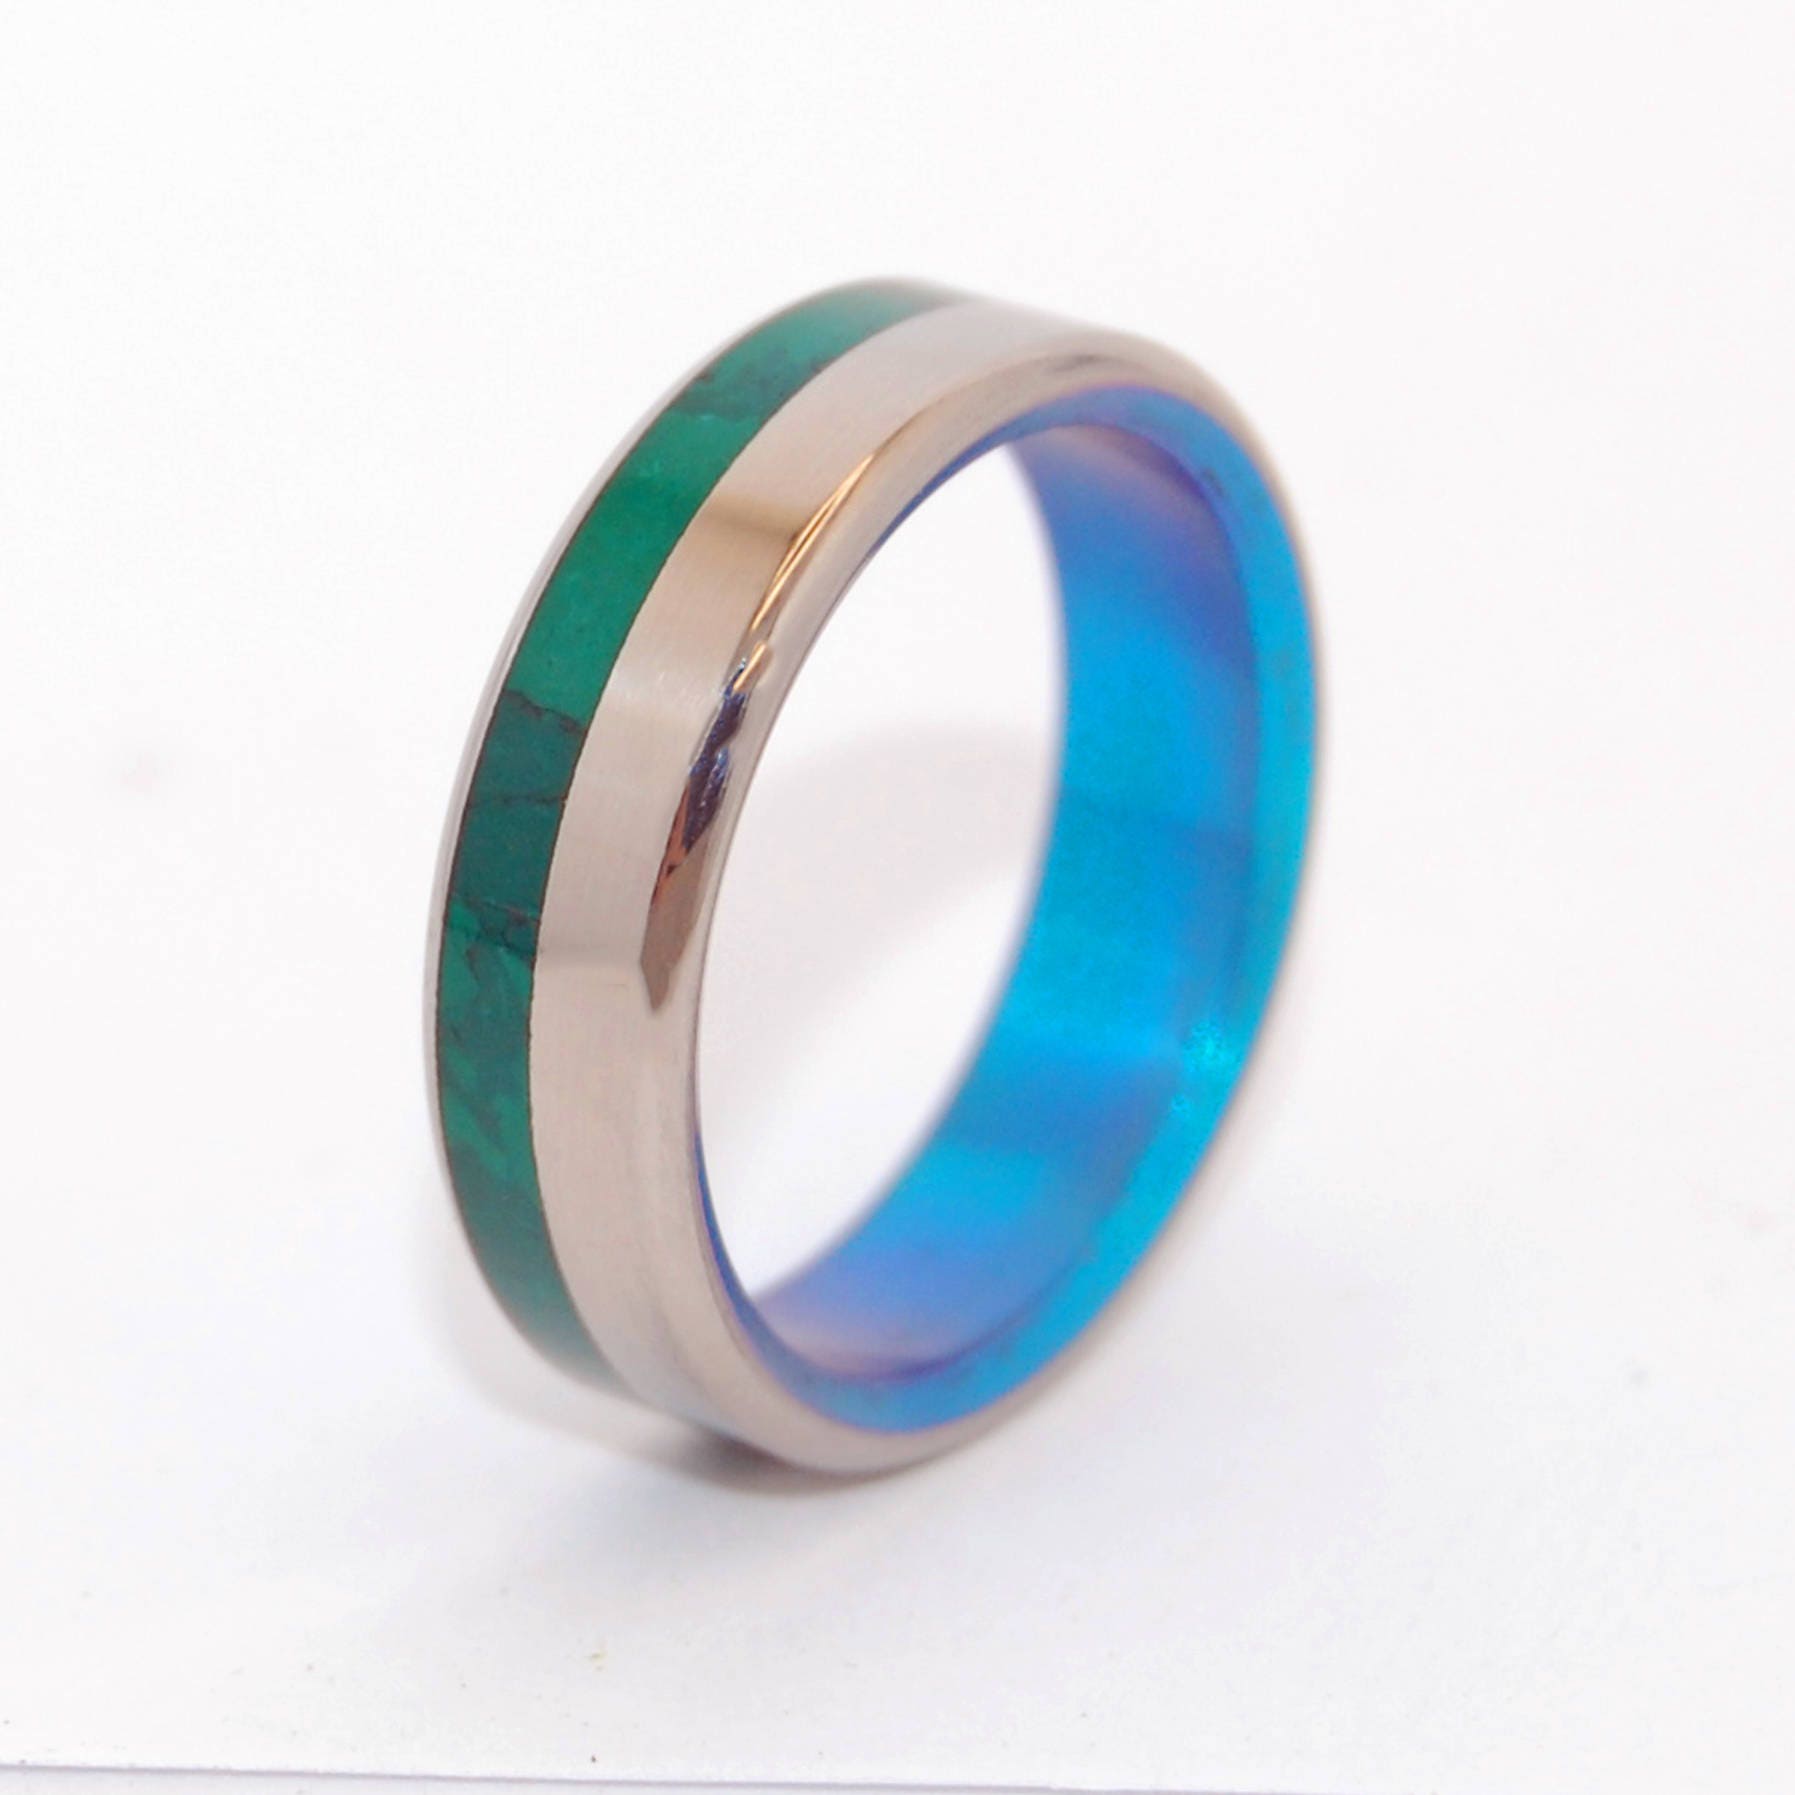 Titanium Ring Sets for Him and Her, Ring Sets, His and Her Rings